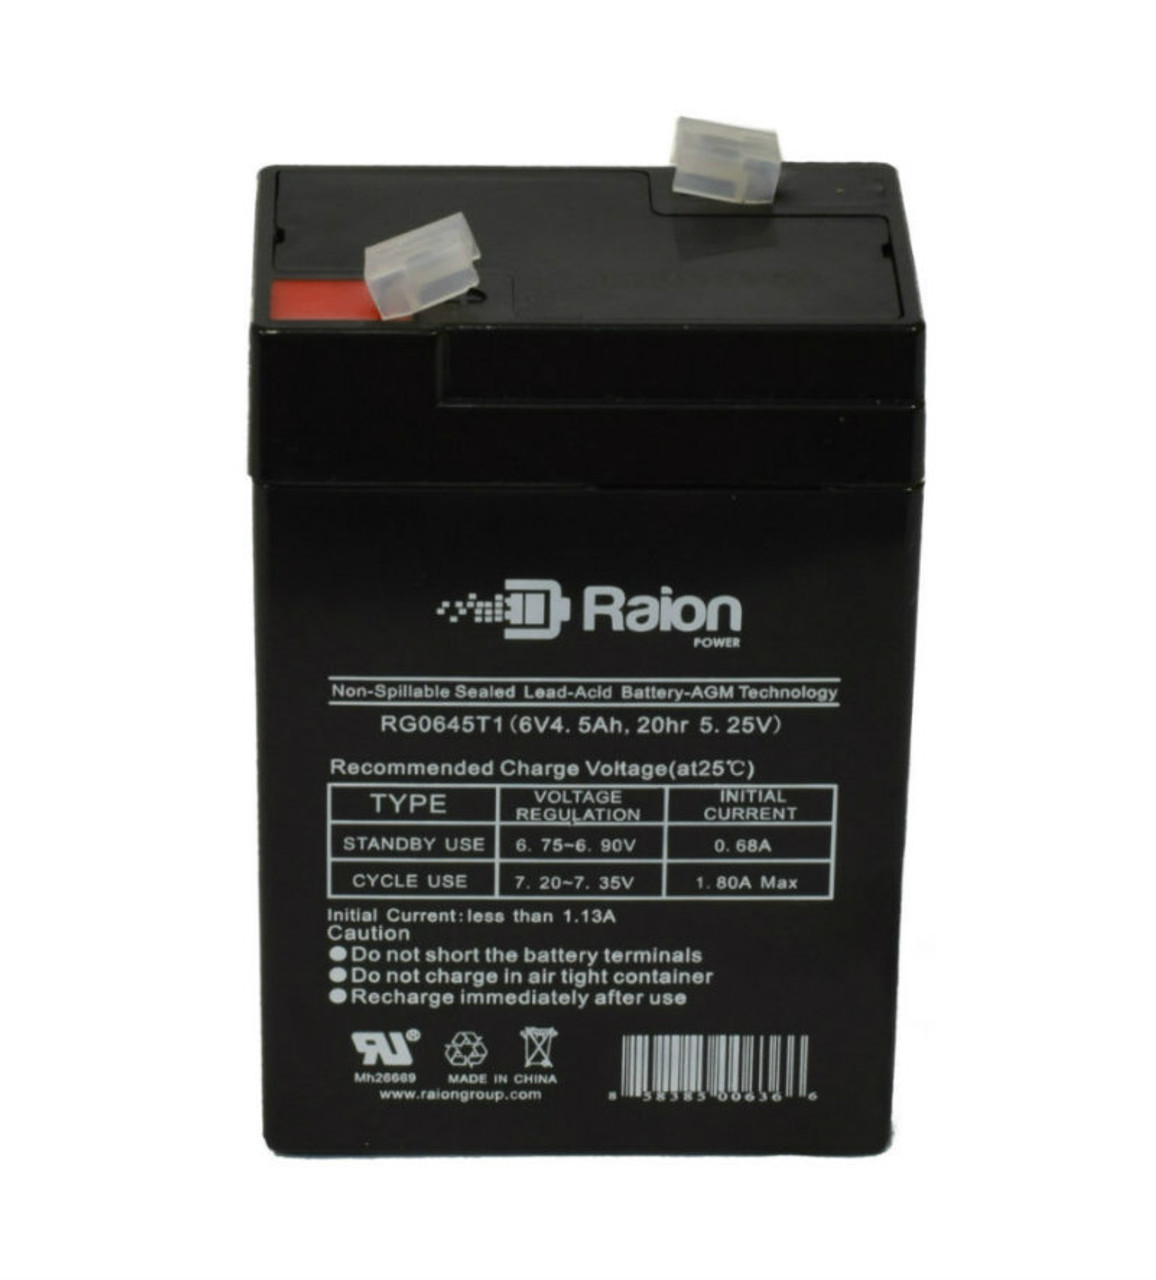 Raion Power RG0645T1 Replacement Battery Cartridge for FIFUTEC FP640